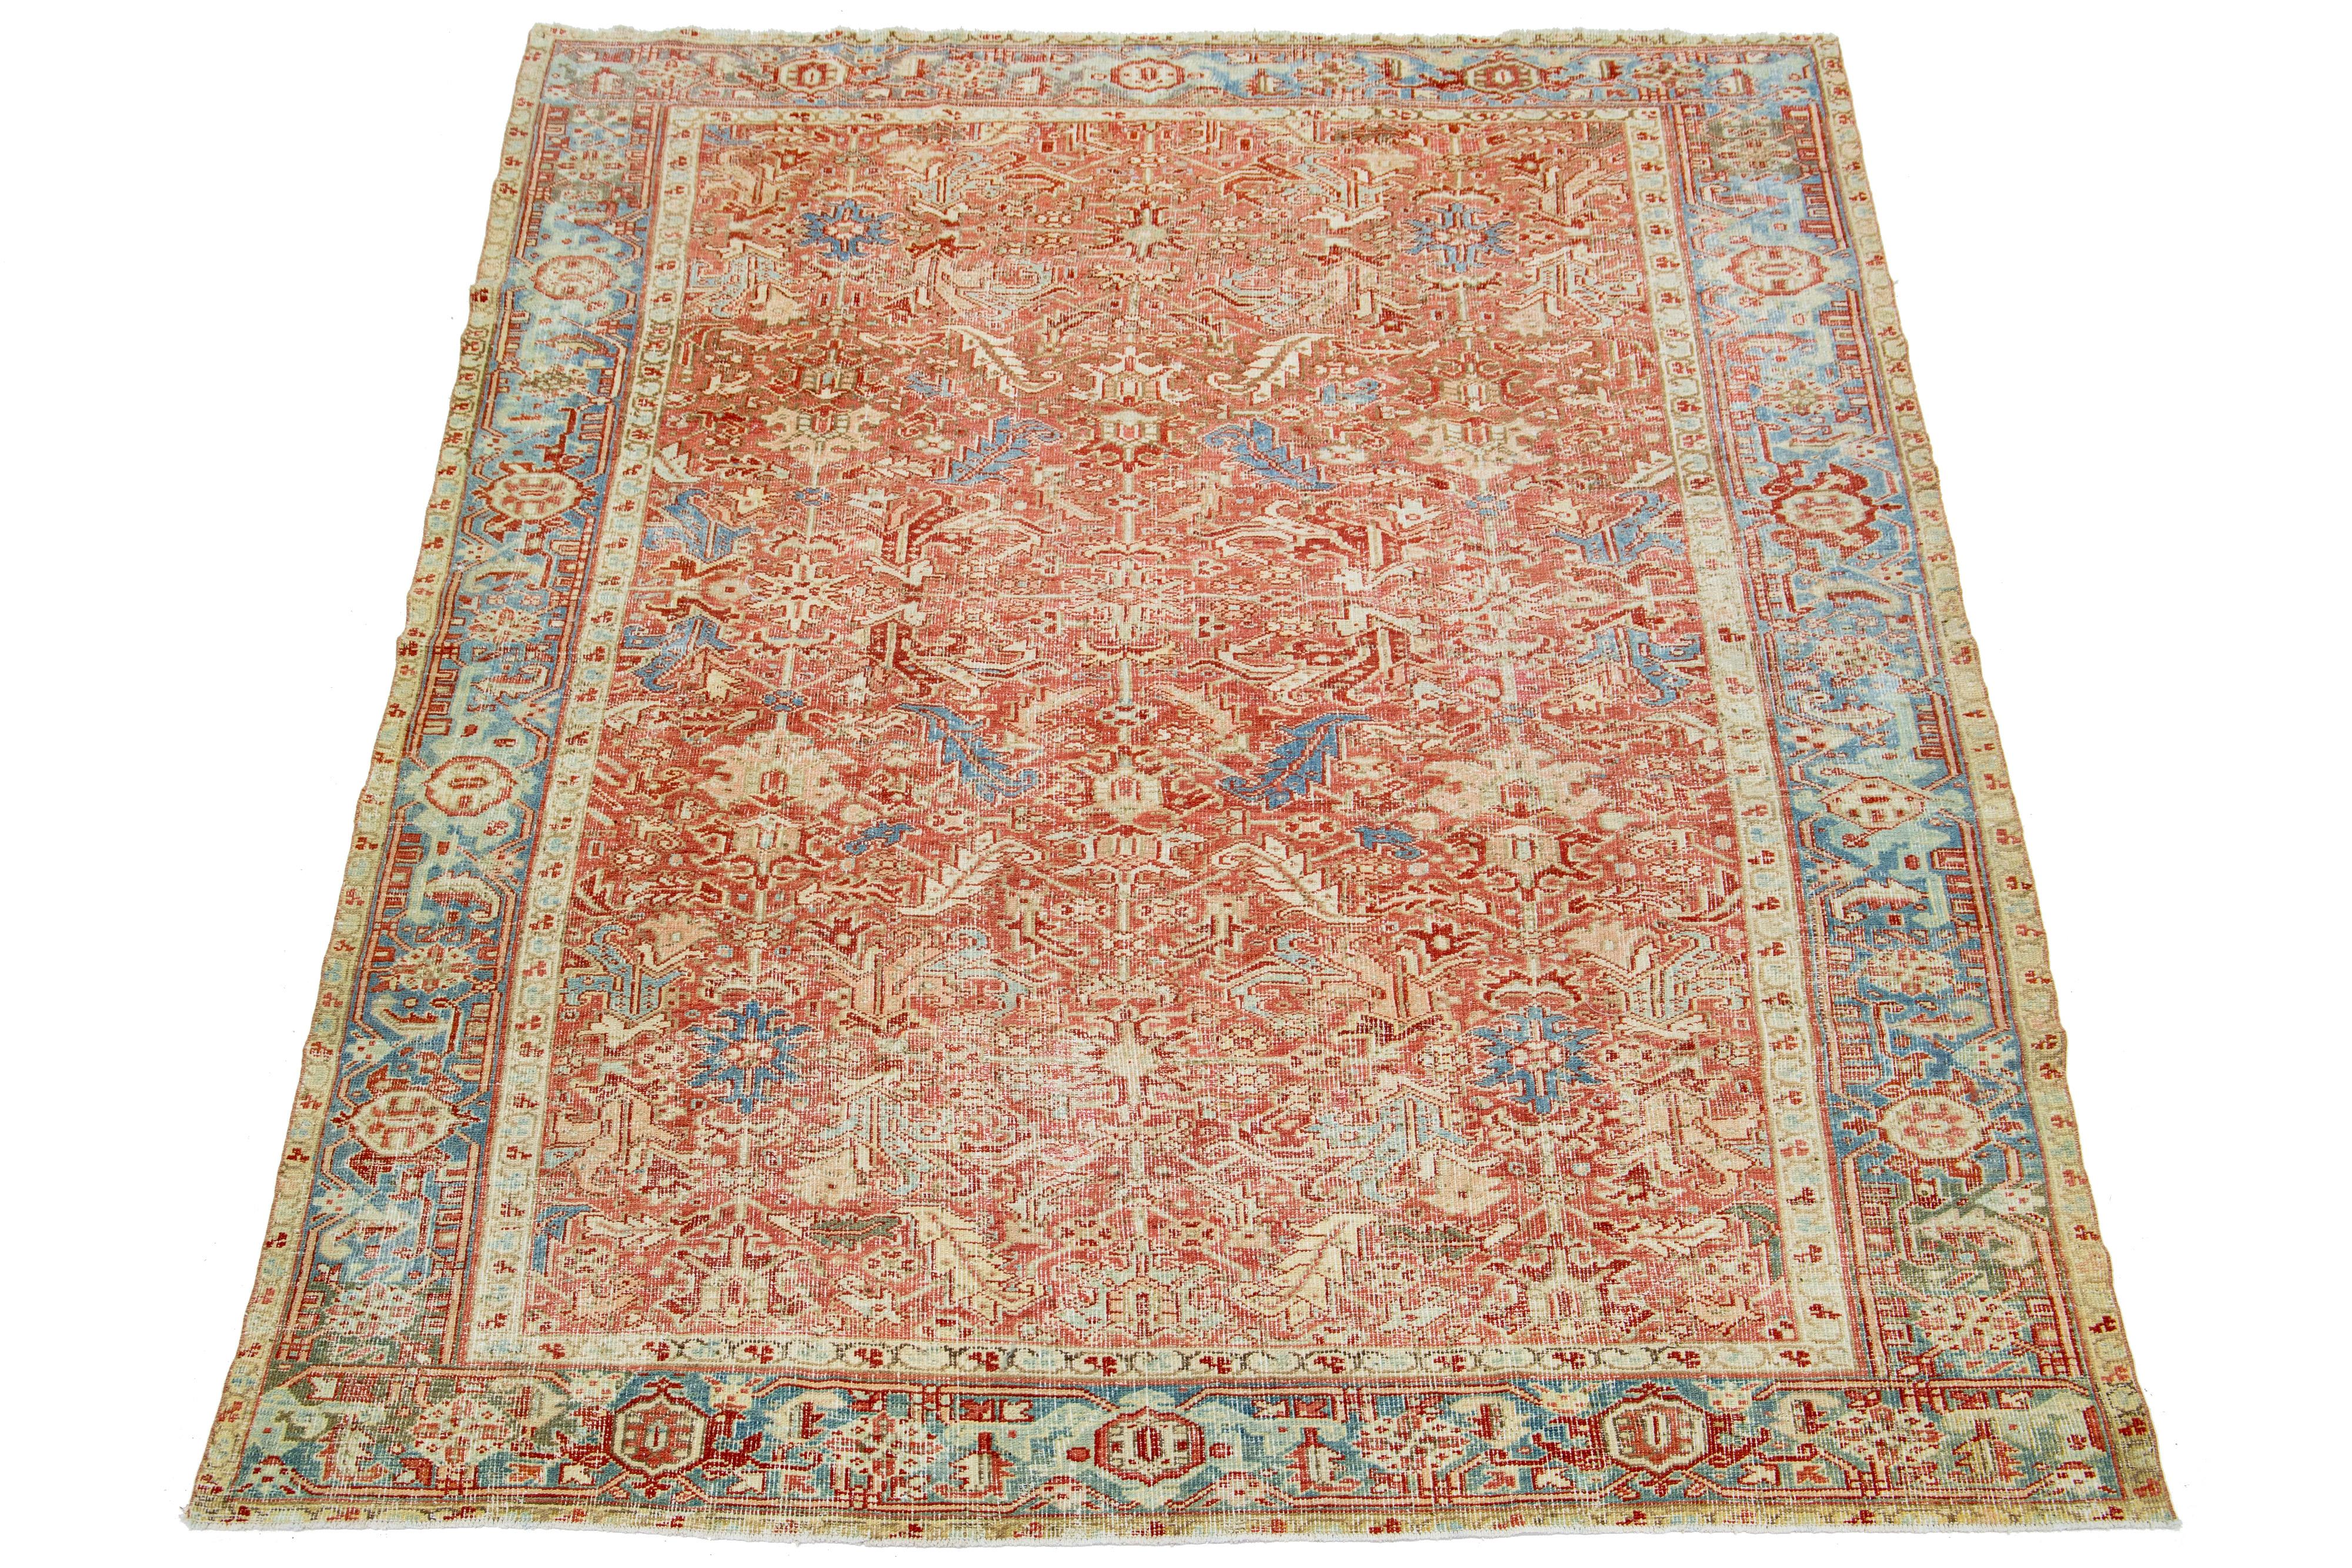 The antique Heriz rug displays its impressive medallion design and hand-knotted wool construction. The soft rust field is a backdrop for the eye-catching geometric floral pattern, adorned in shades of blue and beige, showcasing magnificent Persian